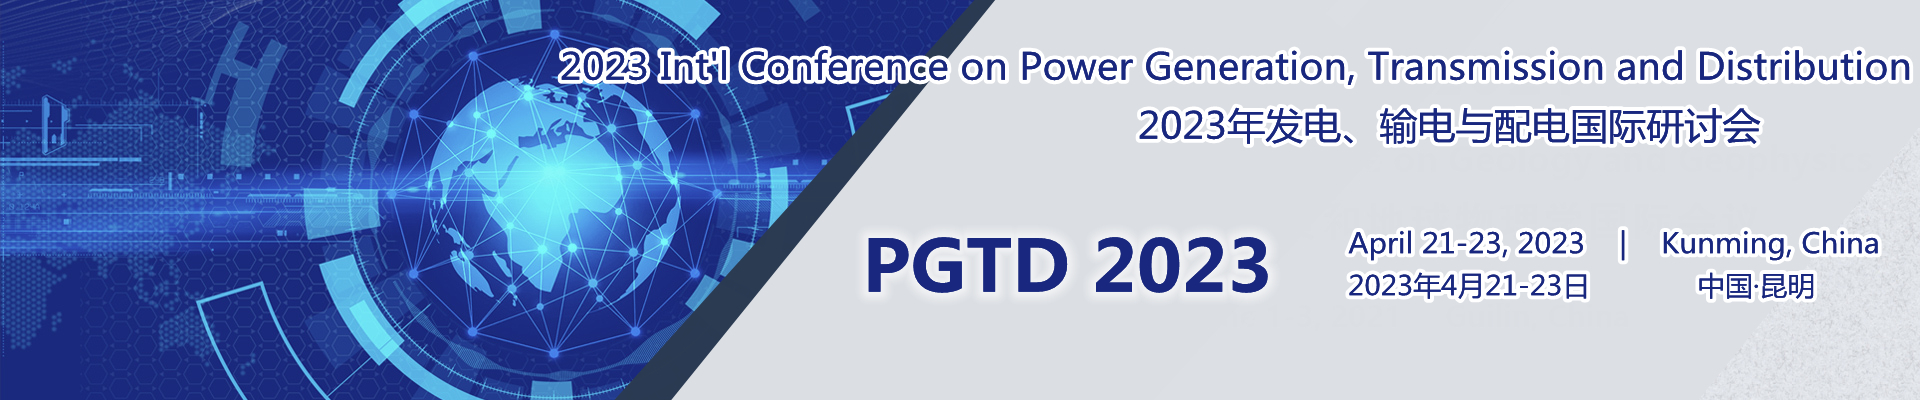 2023 Int'l Conference on Power Generation, Transmission and Distribution (PGTD 2023), Kunming, Yunnan, China